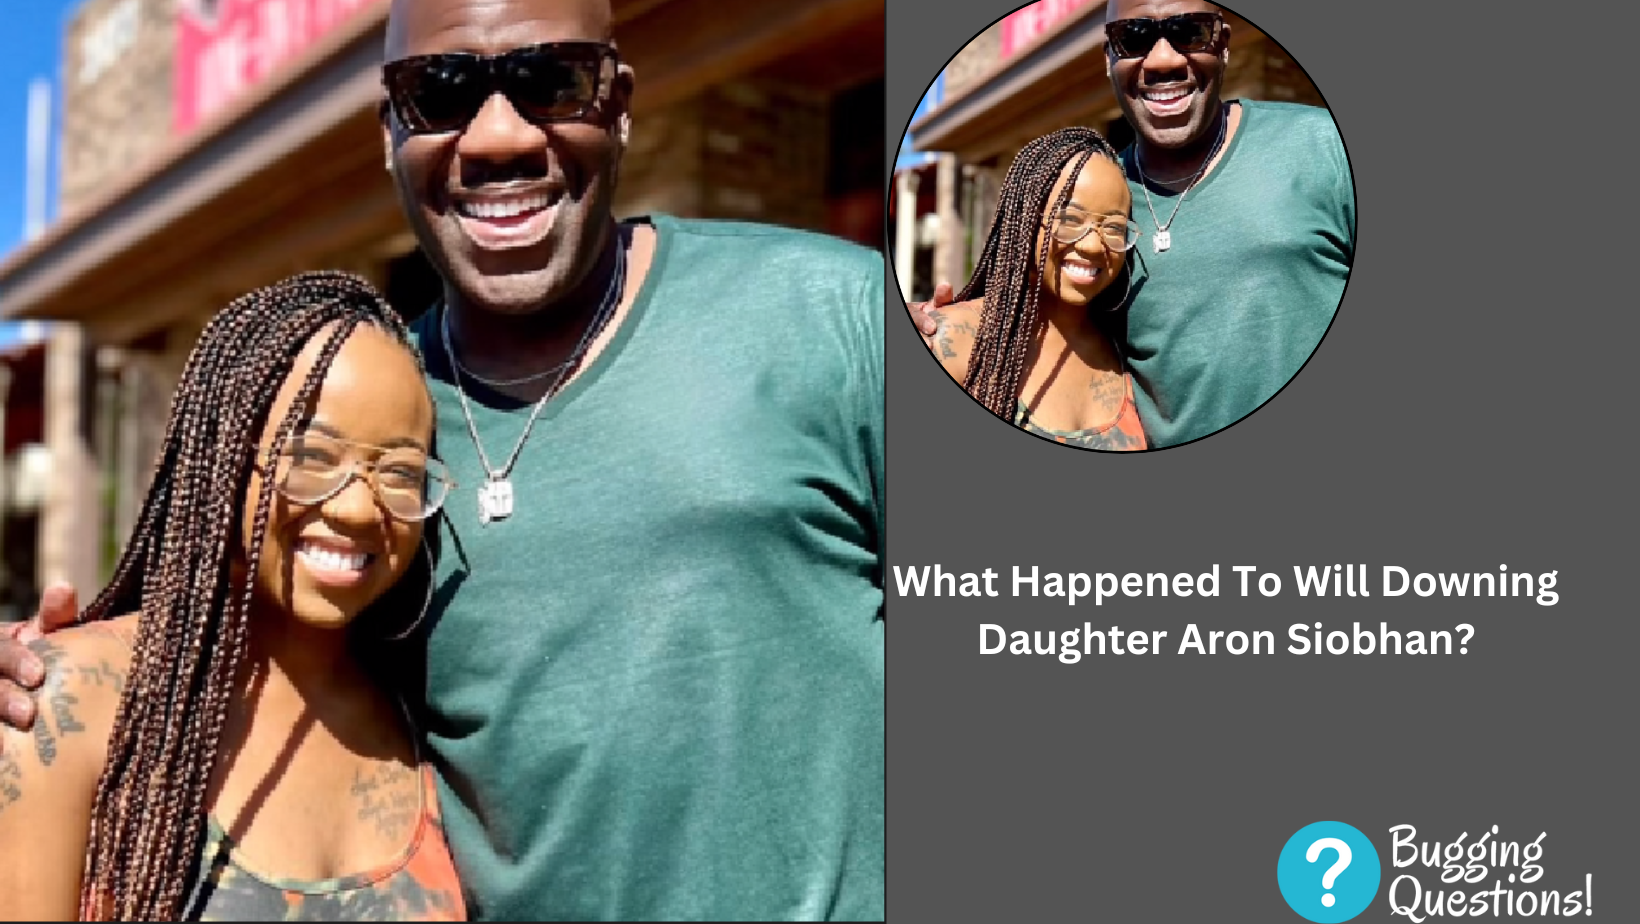 What Happened To Will Downing Daughter Aron Siobhan?